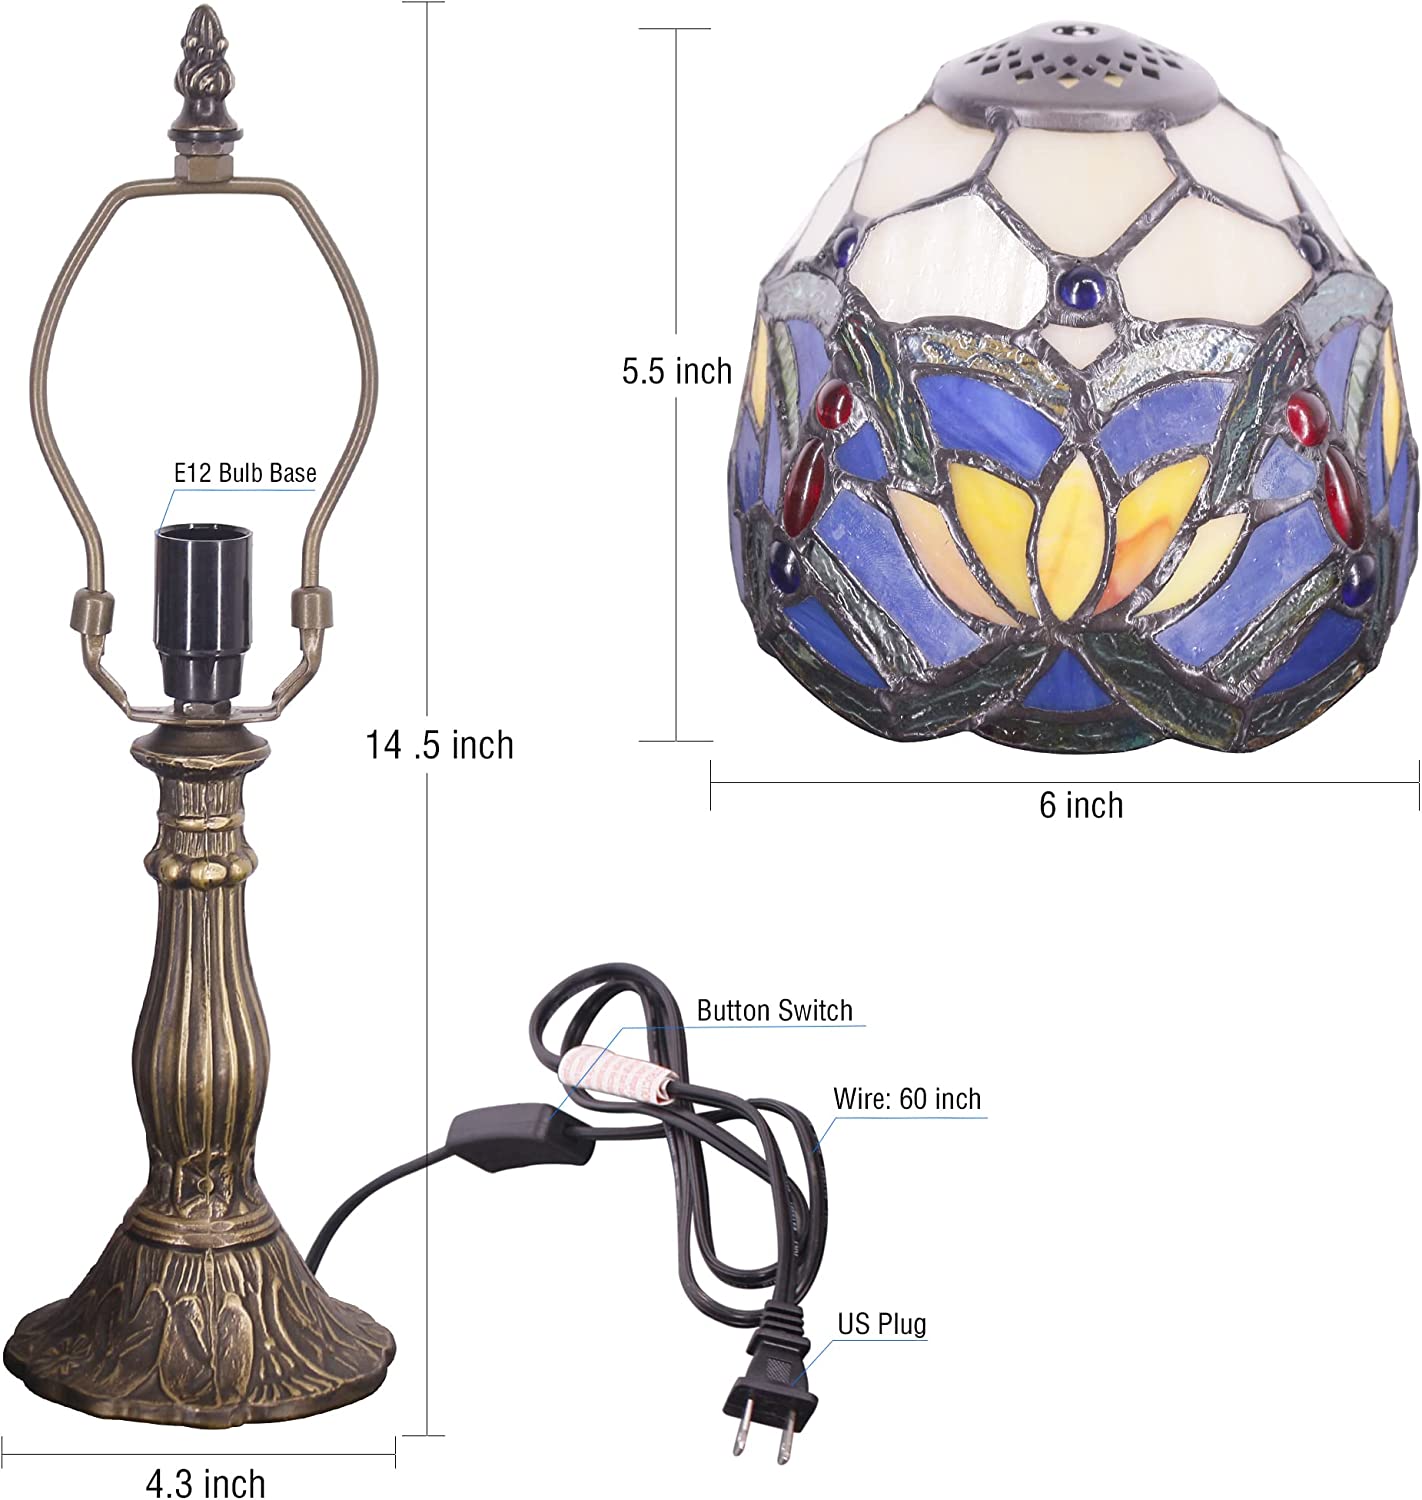 Werfactory® Small Tiffany Lamp Blue Stained Glass Lotus Style Table Lamp, 14" Tall